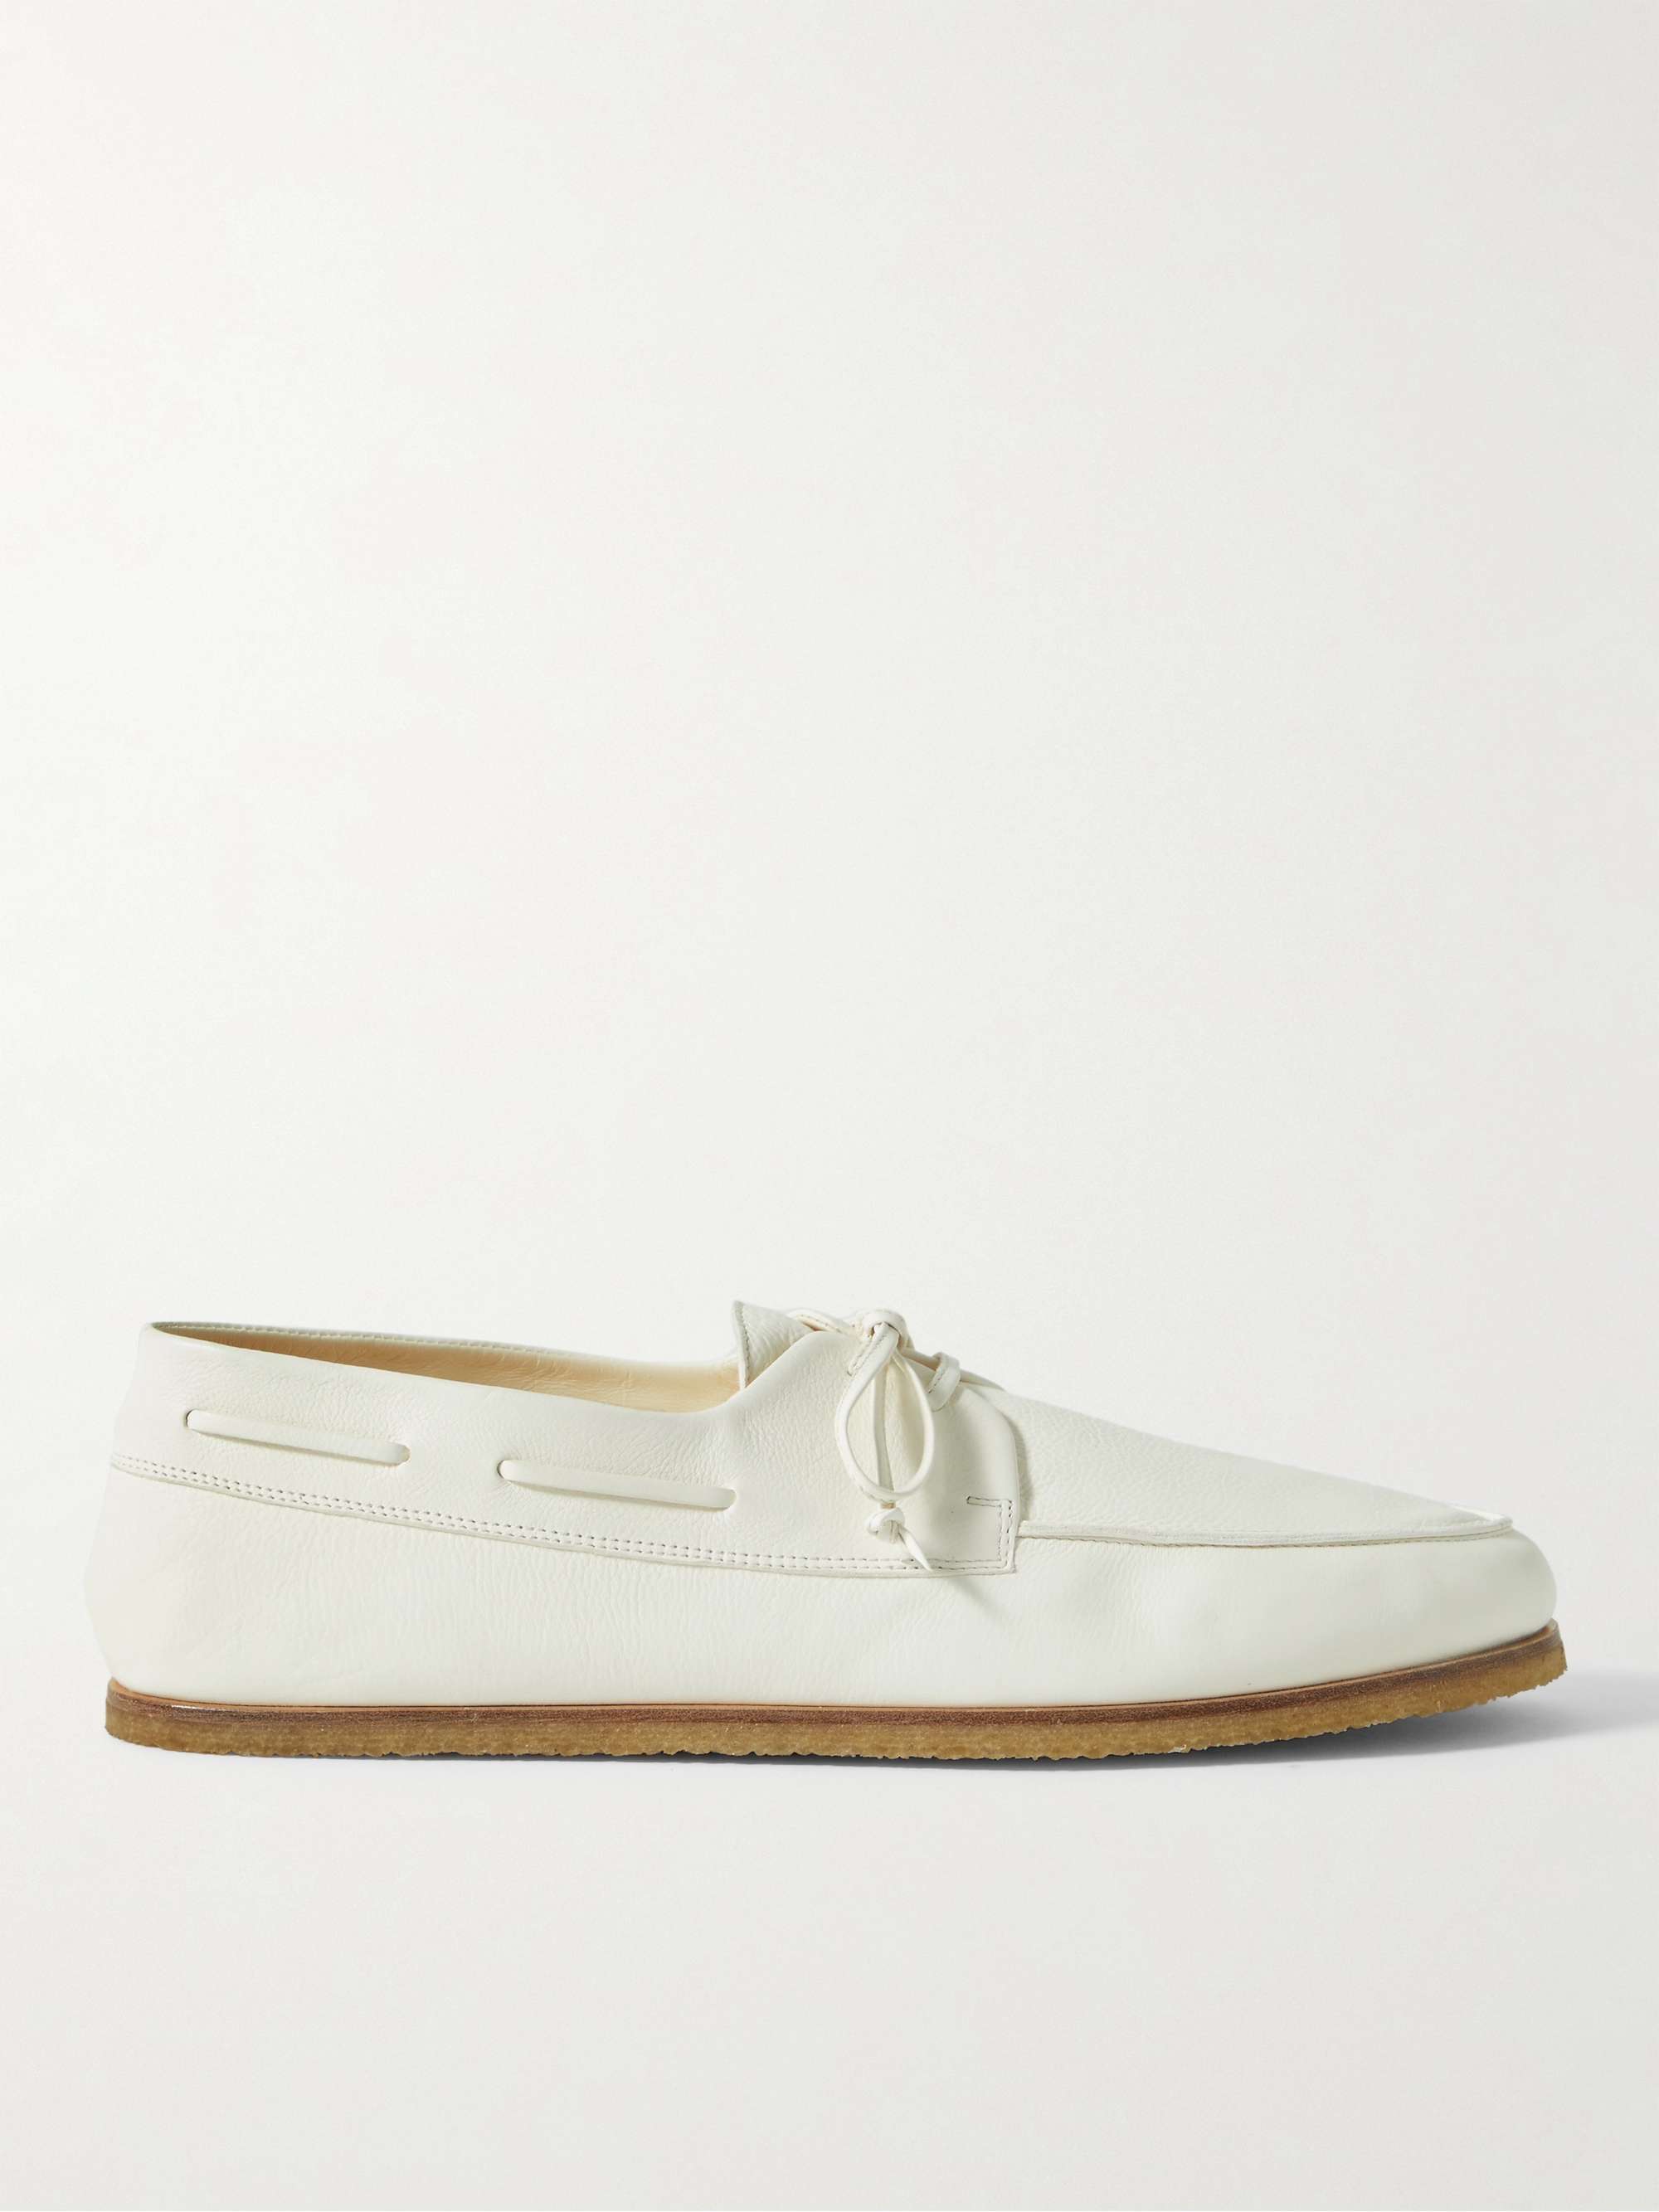 The Row Sailor Full-grain Leather Boat Shoes in White for Men Mens Shoes Slip-on shoes Boat and deck shoes 